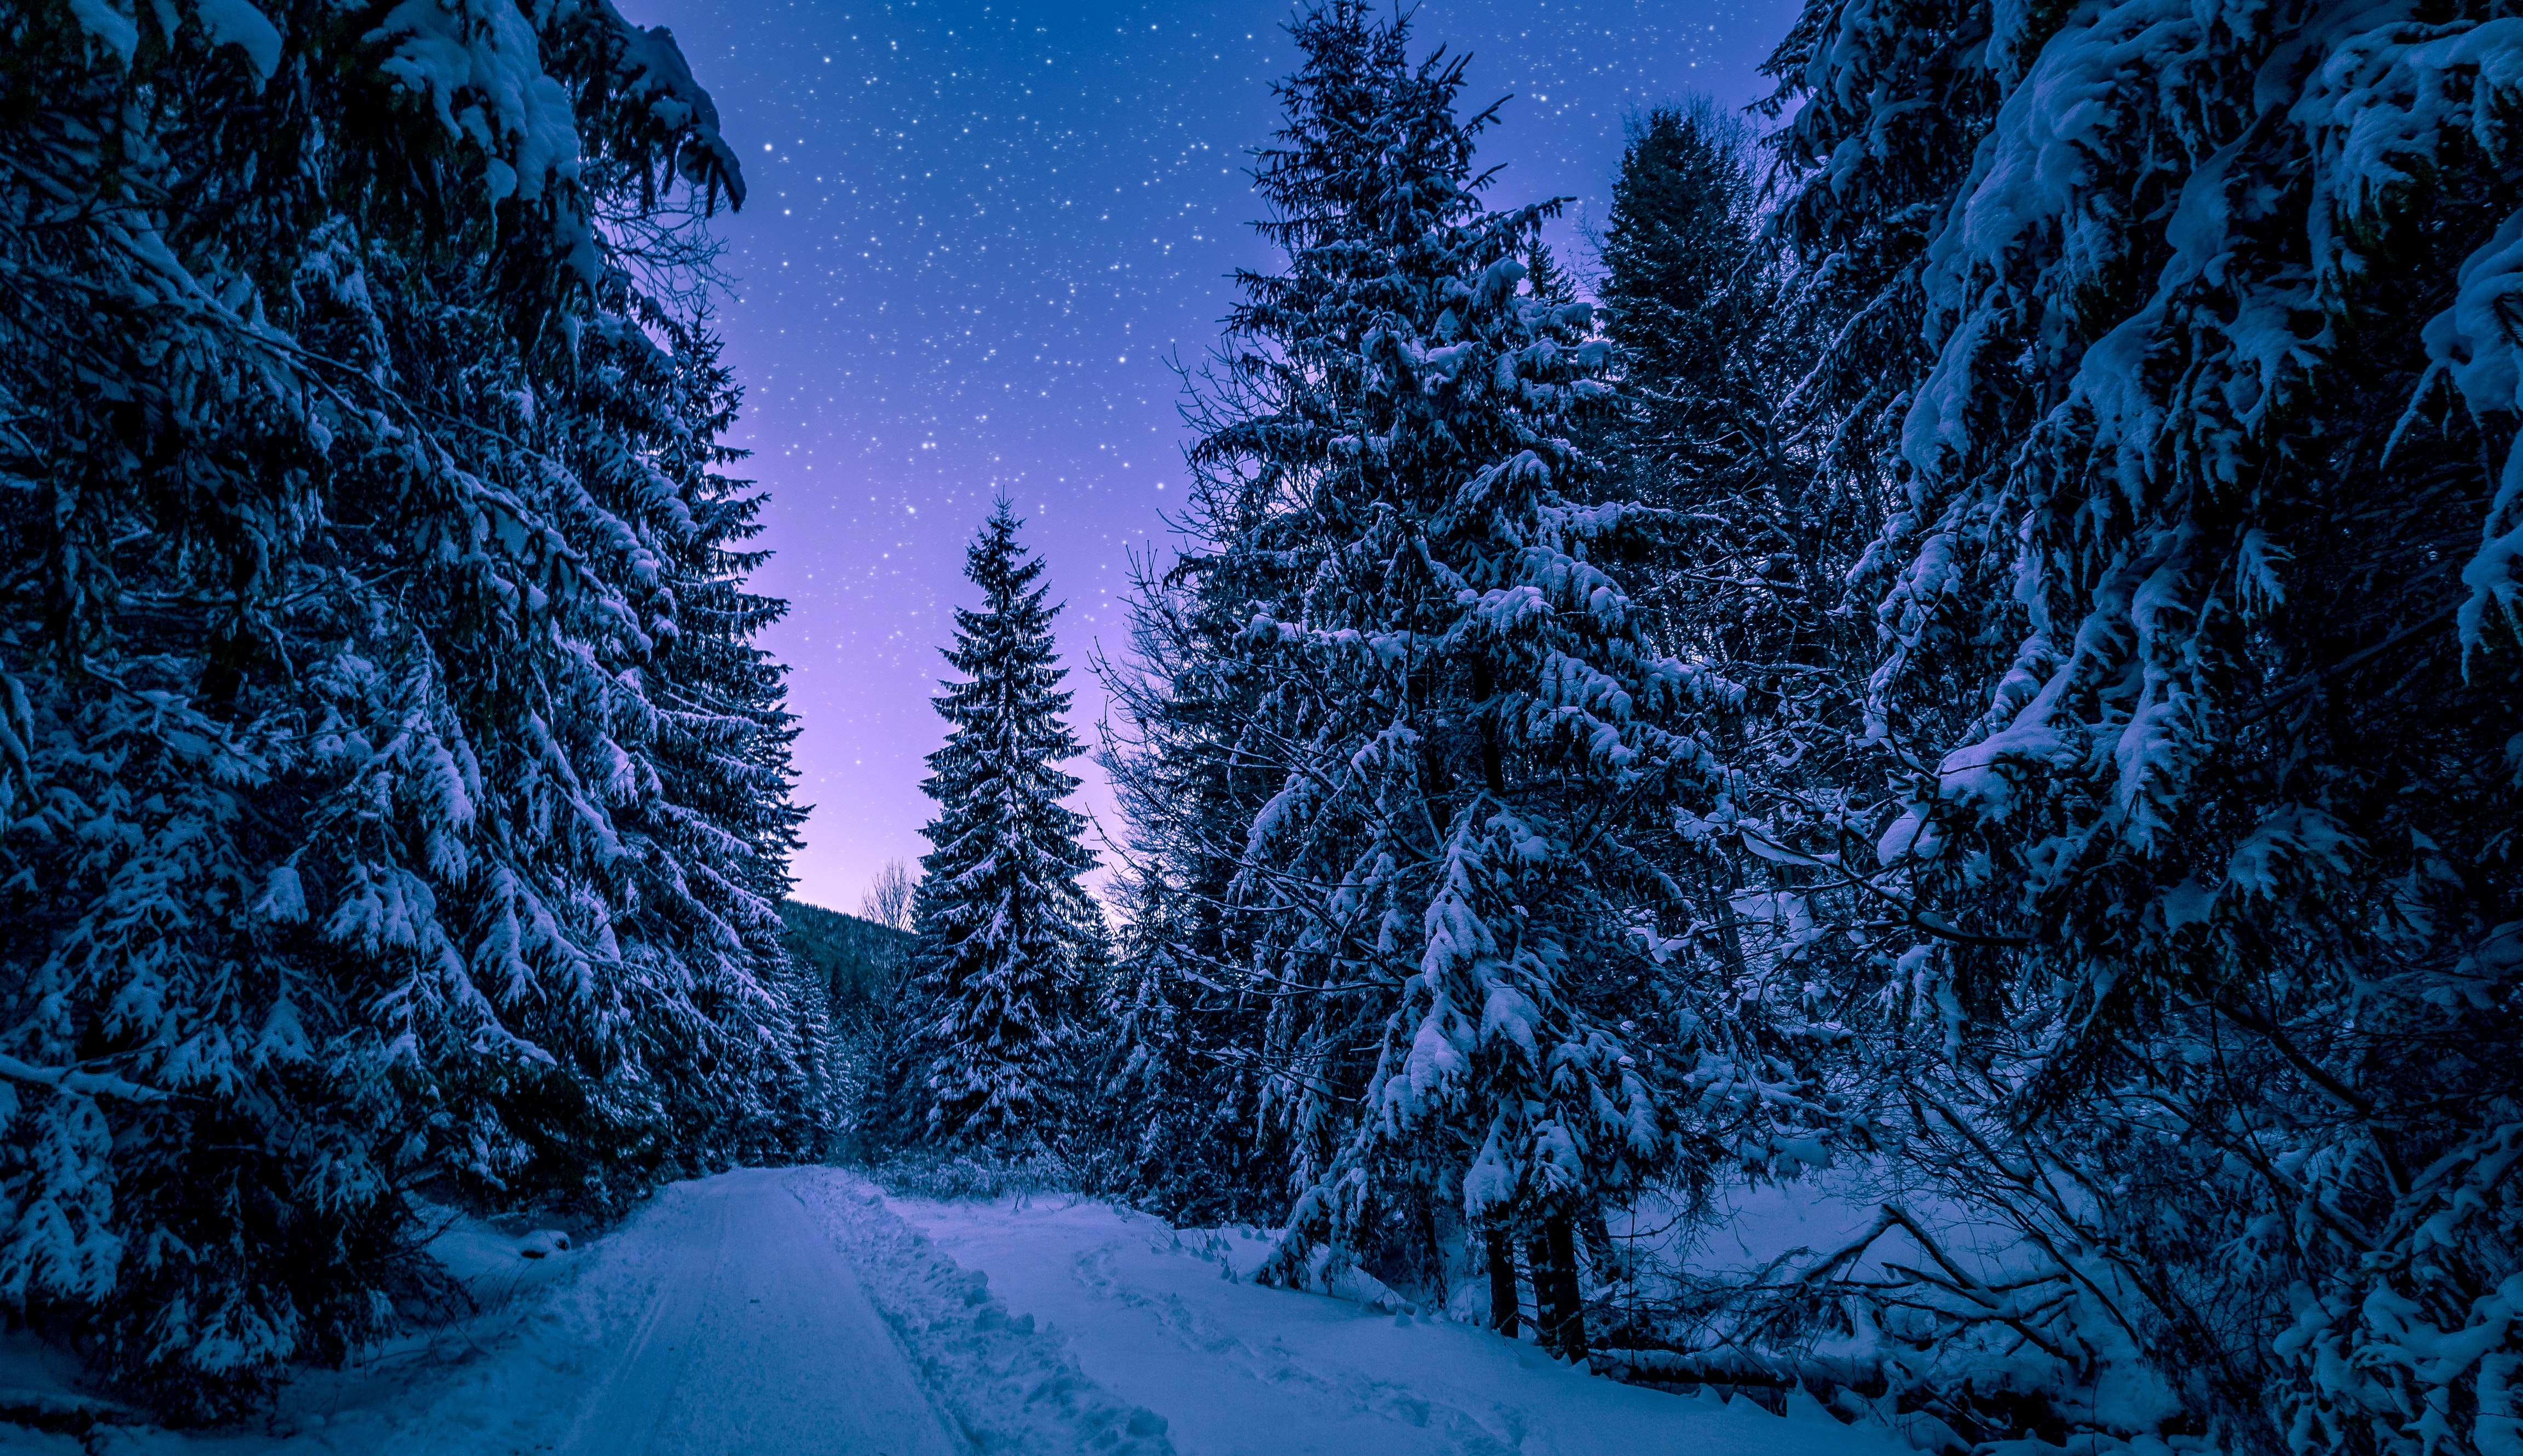 HD wallpaper, Night Sky, Pine Trees, Seasons, Frozen, Winter, Snowy Trees, Snow Covered, Forest